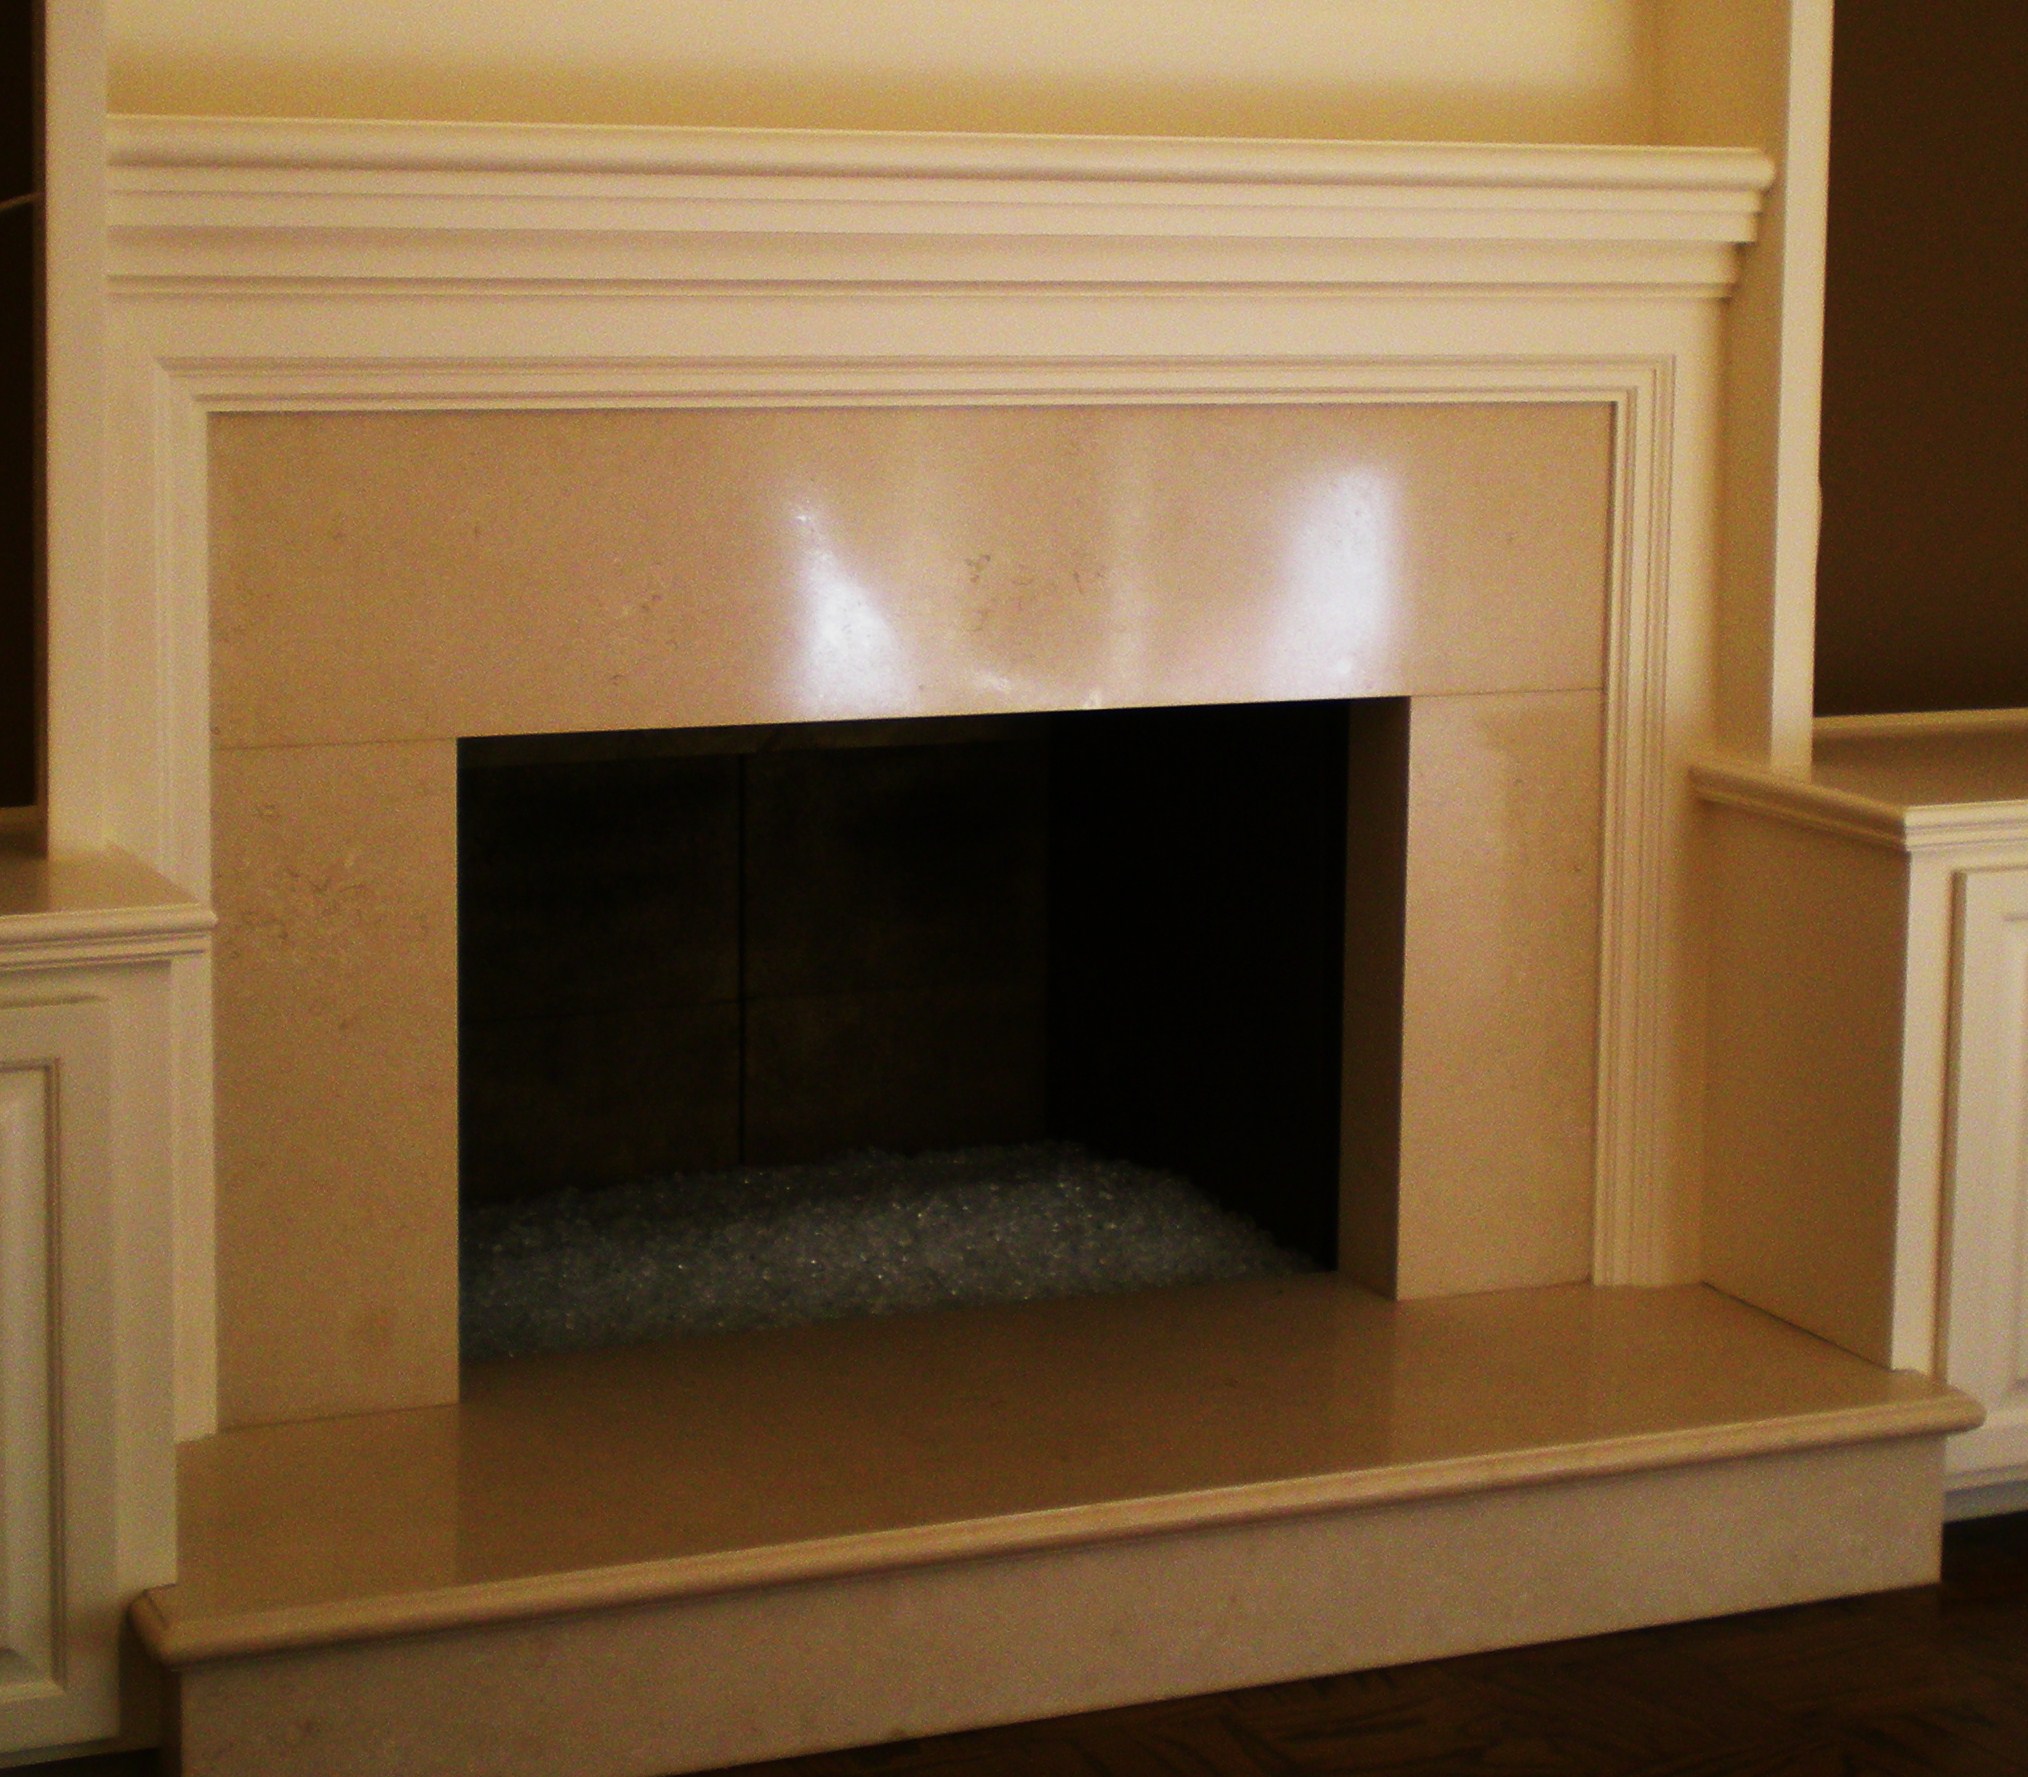 Painting a fireplace